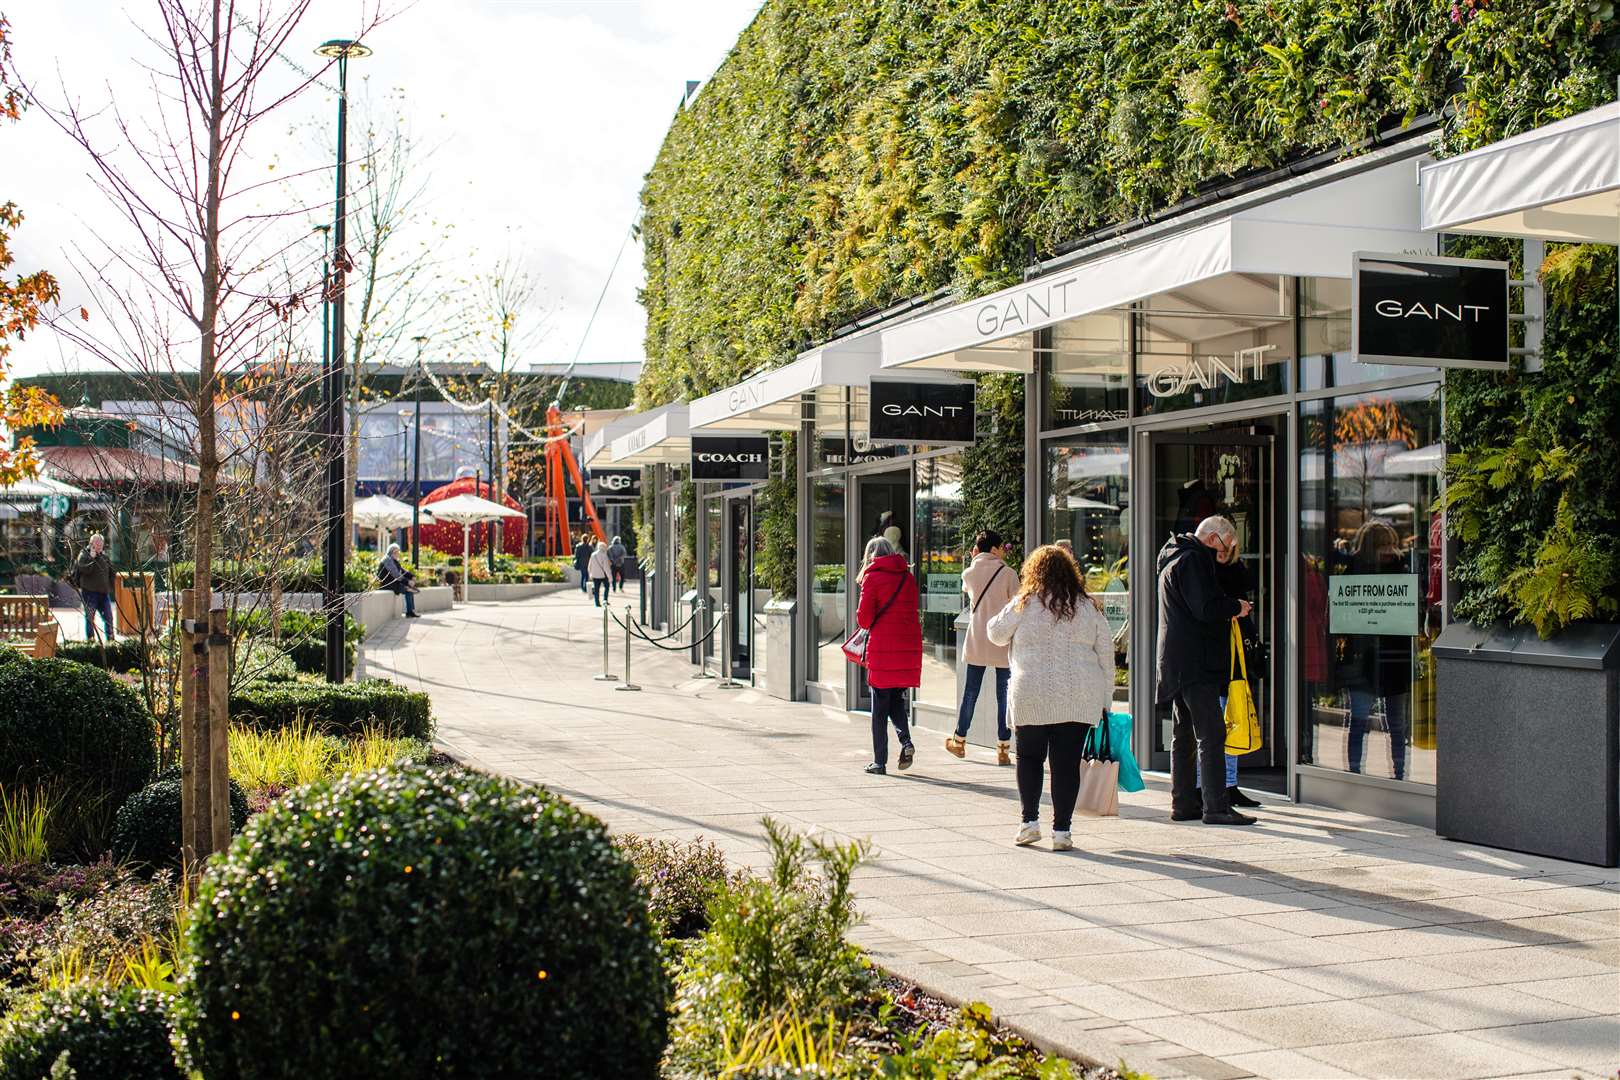 The Ashford Designer Outlet has refuted claims that a coronavirus sufferer visited the centre